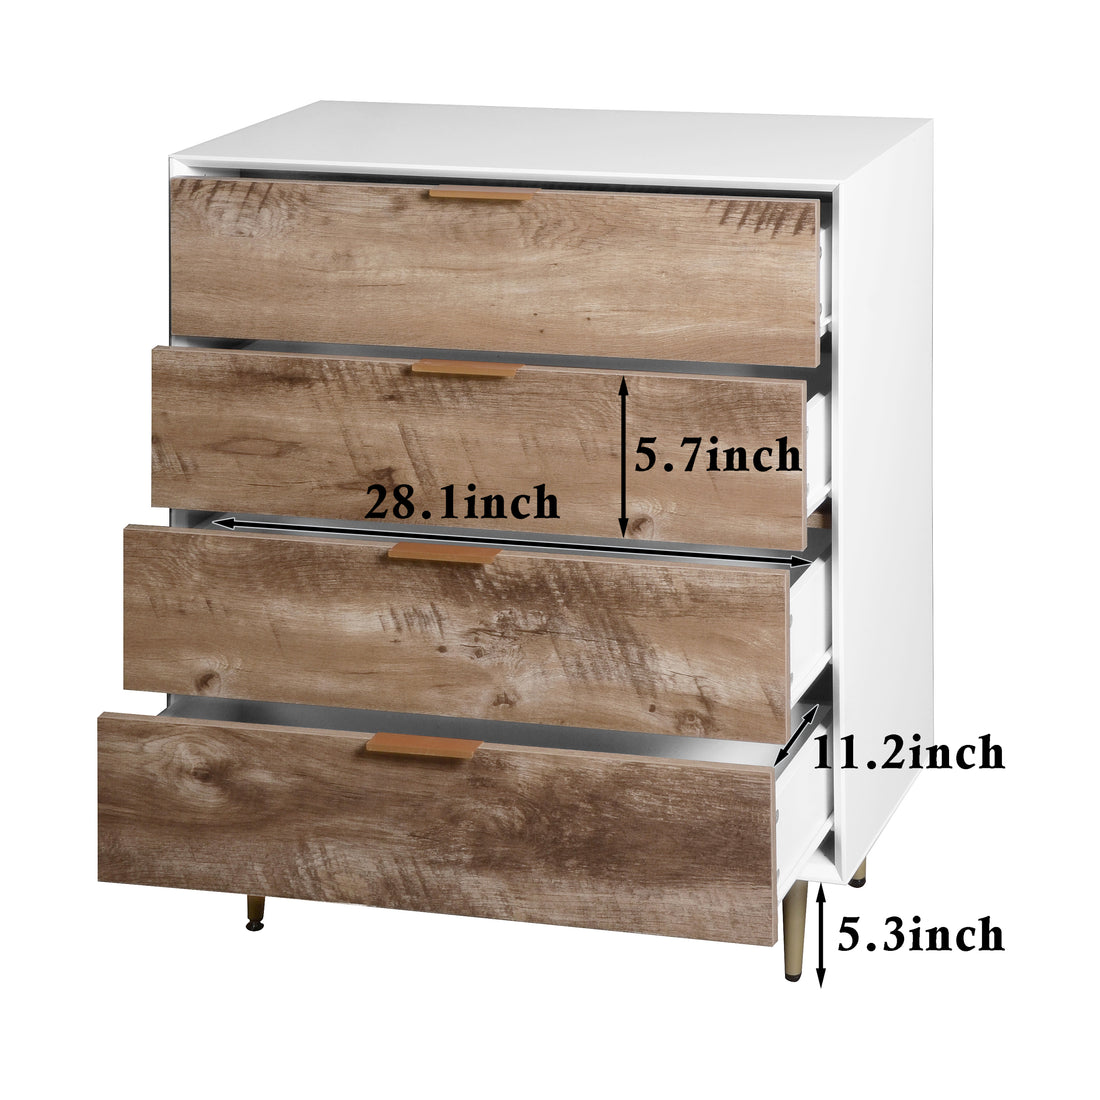 Wooden Tall 4 Drawer Dresser,Chest Of Drawers